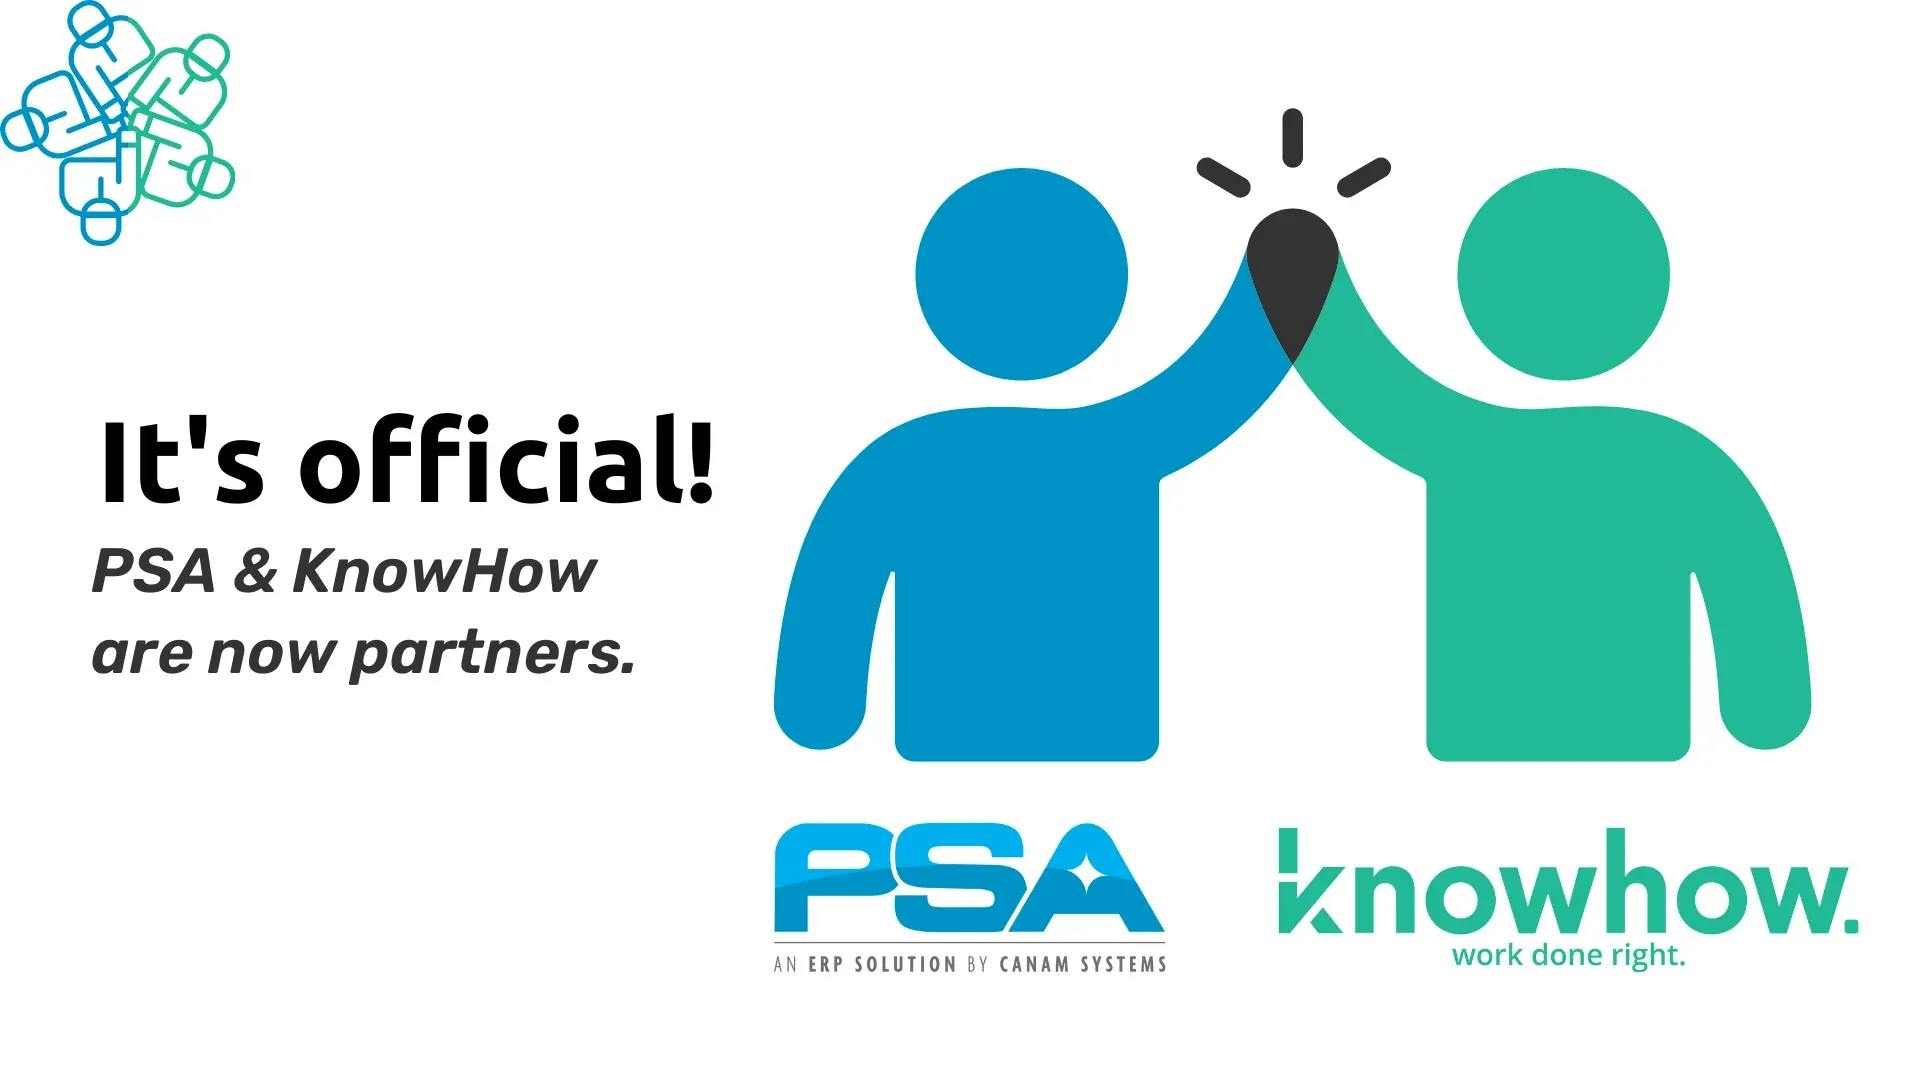 KnowHow Partners with PSA to Drive Rapid Worker Onboarding & How-to Training!